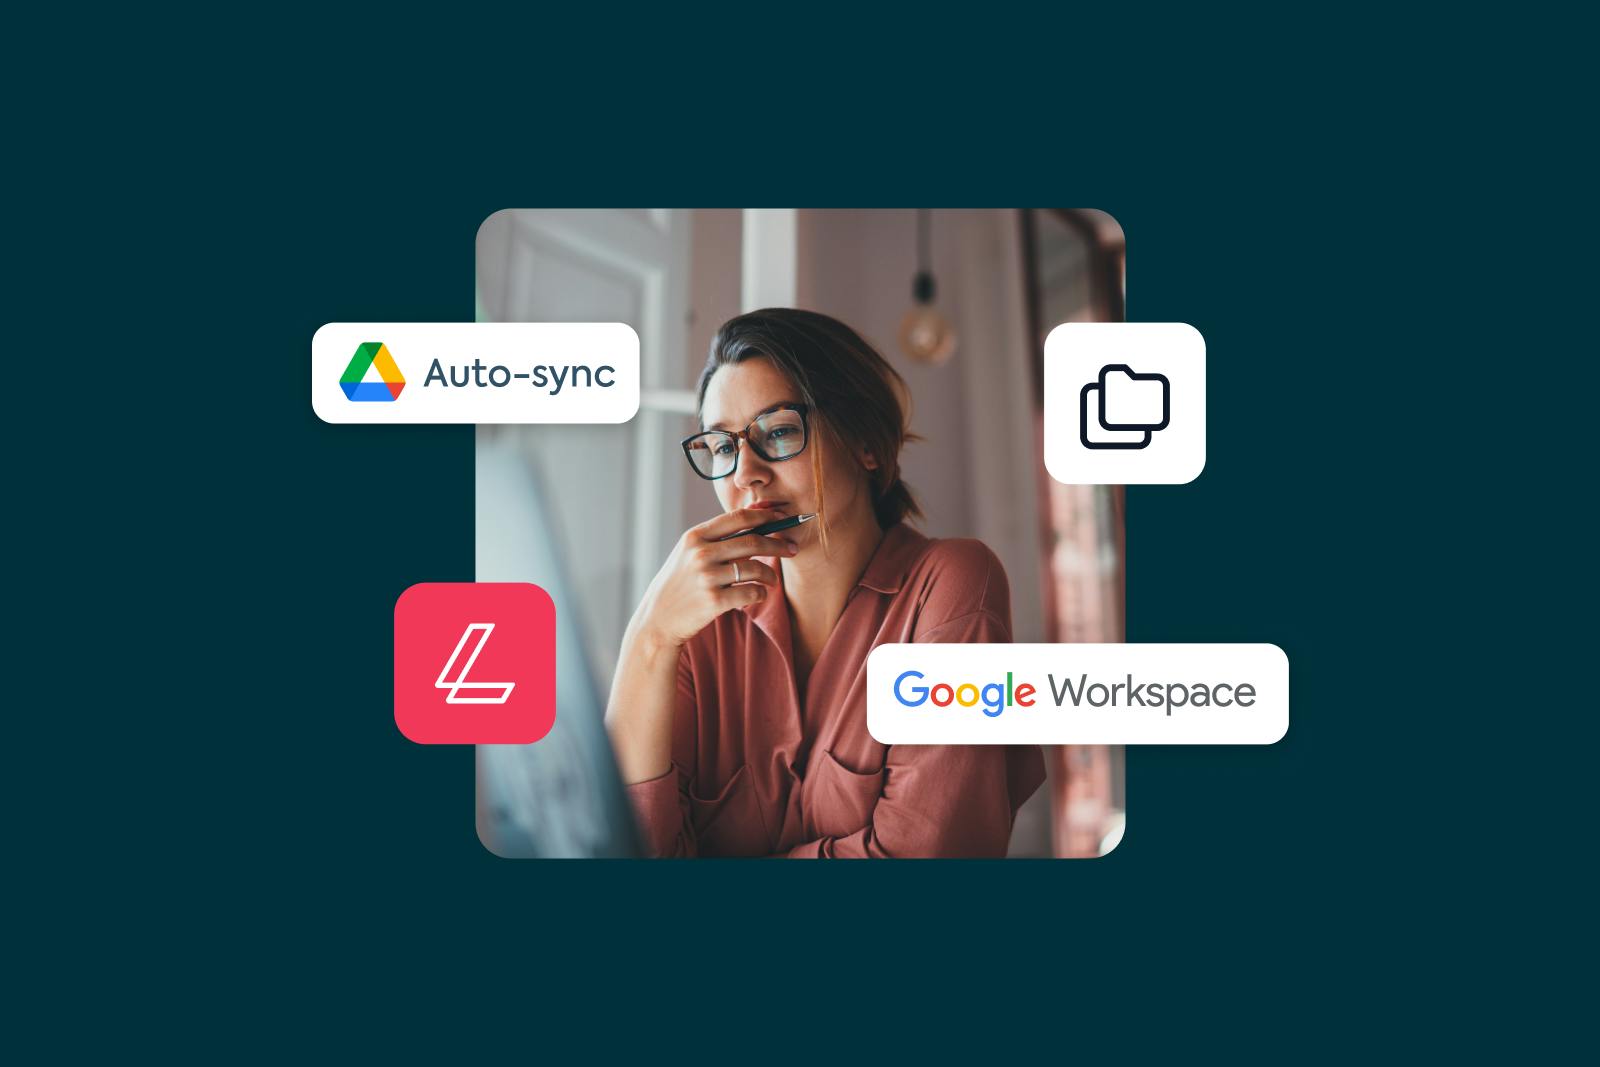 Getting started with Google Workspace